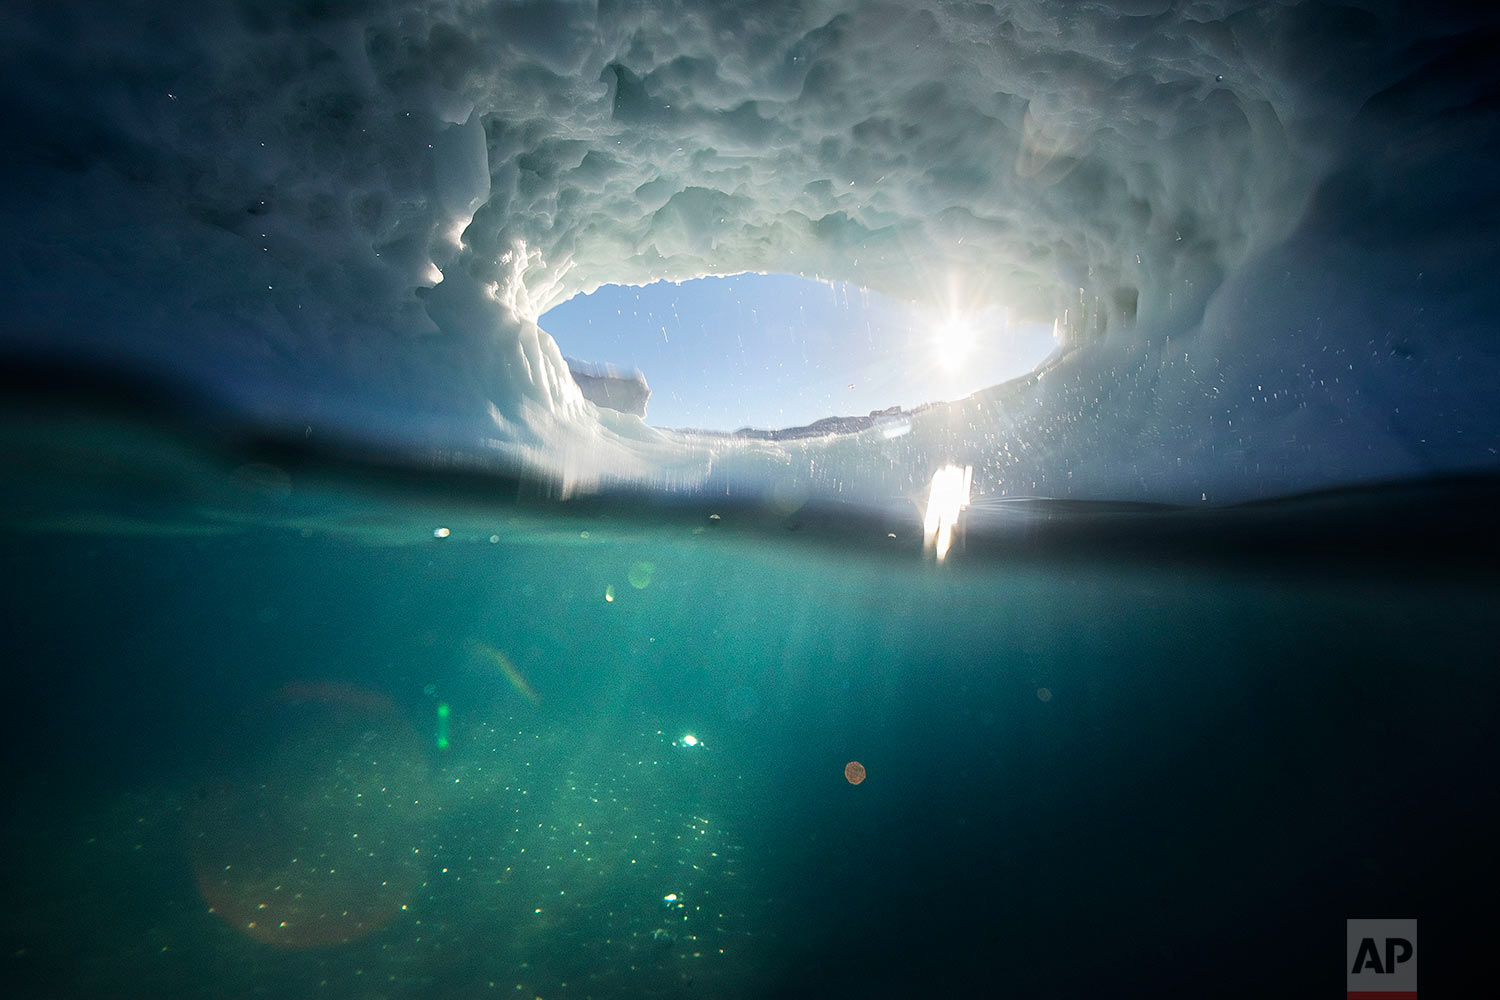  The submerged section of an iceberg is illuminated underwater by the setting sun through a hole melted in the iceberg floating in the Nuup Kangerlua Fjord near Nuuk in southwestern Greenland, Tuesday, Aug. 1, 2017. (AP Photo/David Goldman) 